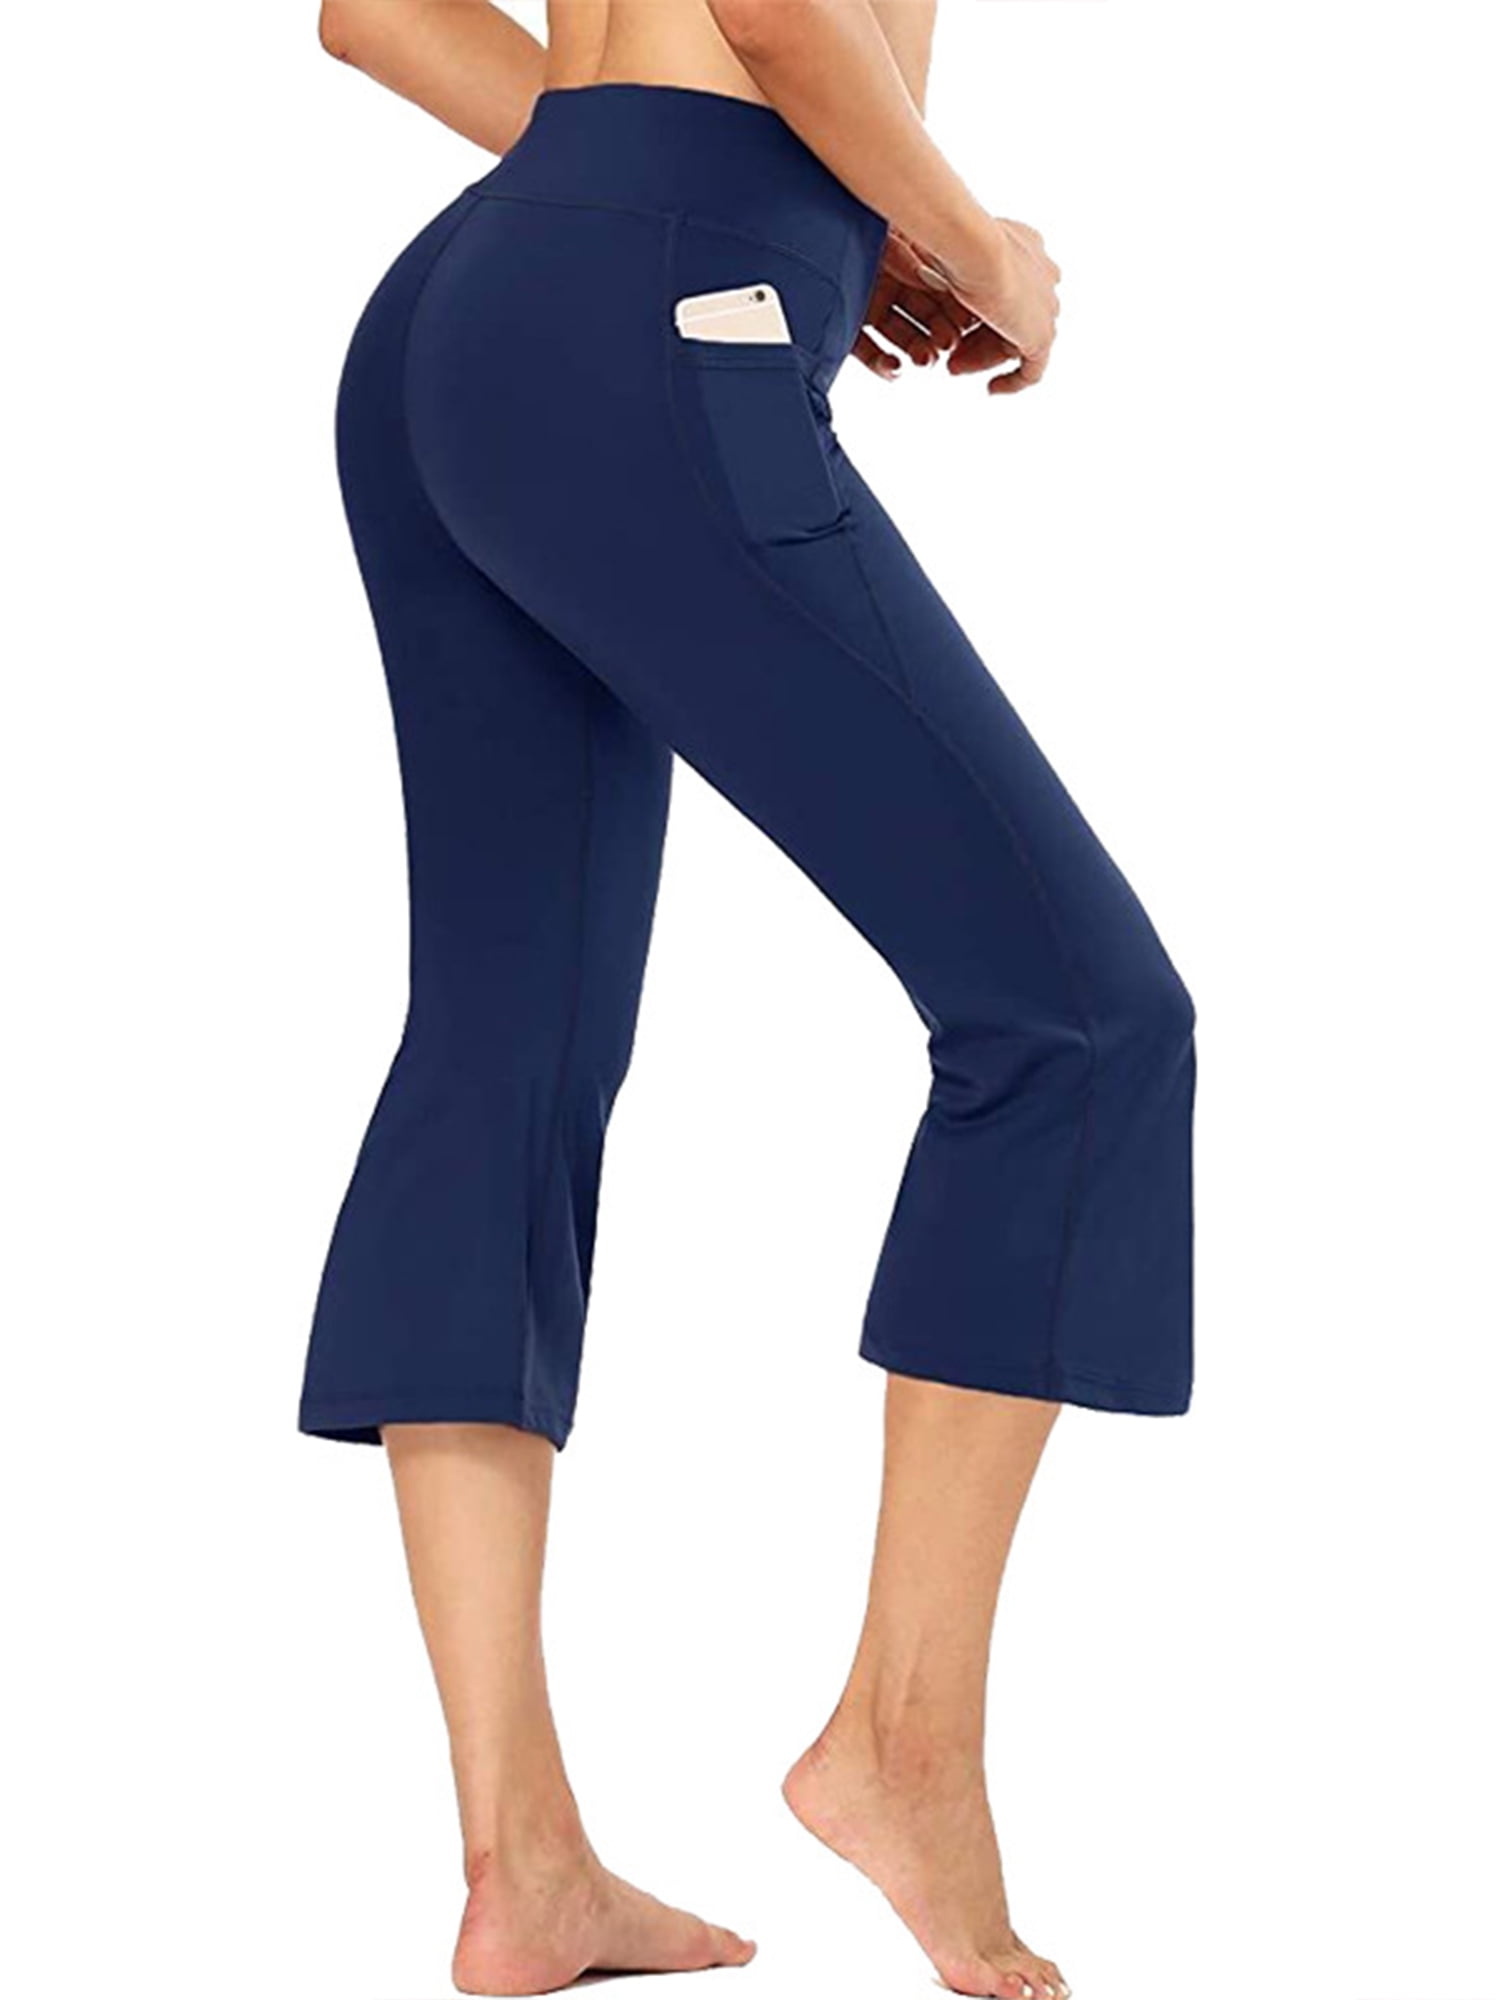 BALEAF Bootcut Yoga Pants for Women with Pockets High Waisted Workout Flare Crop Work Pants 